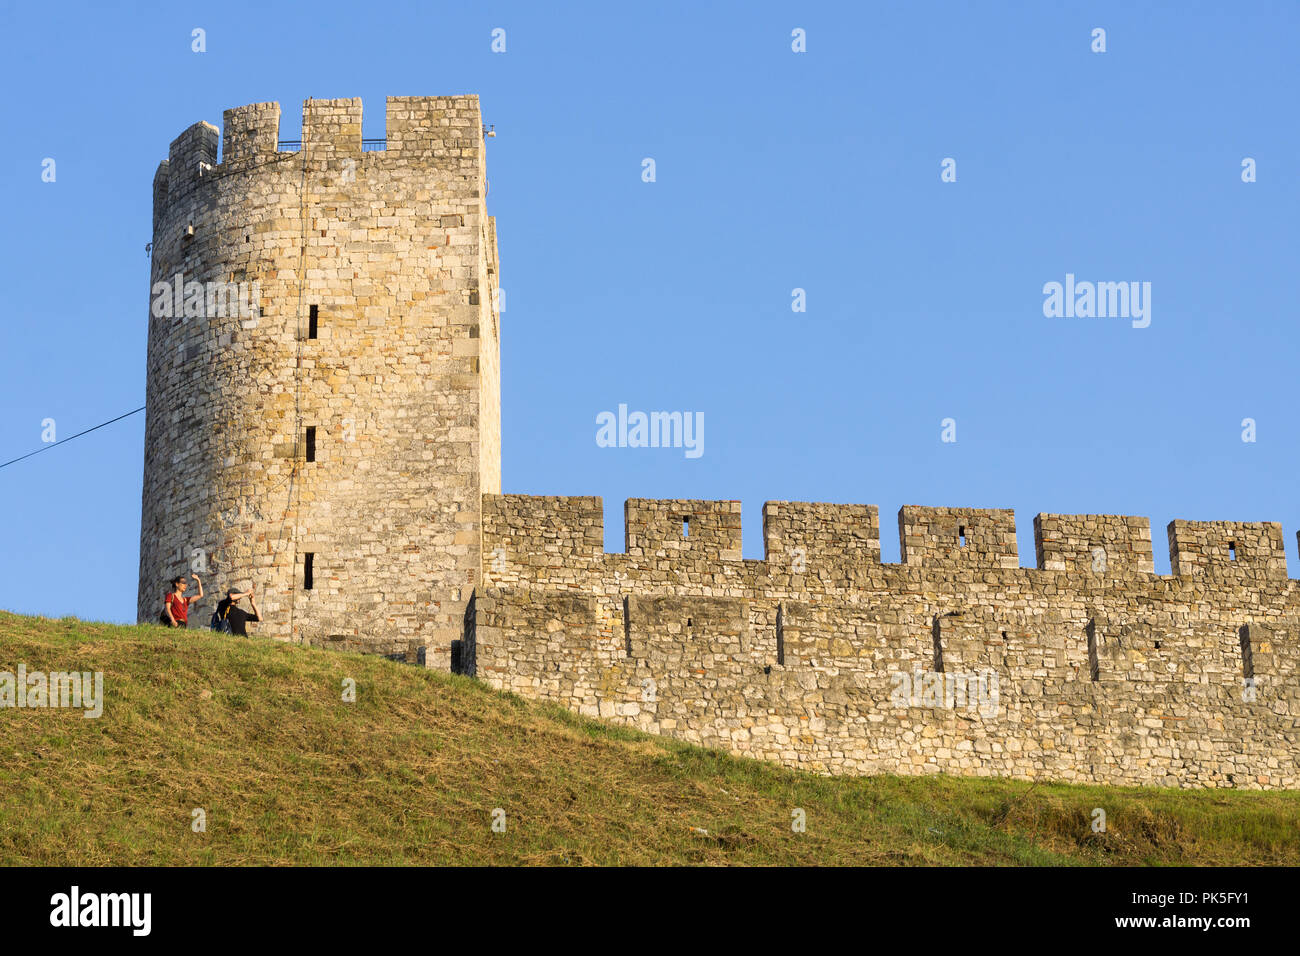 Tourists checking the view near the Dizdar tower at the Belgrade fortress Kalemegdan, Serbia. Stock Photo